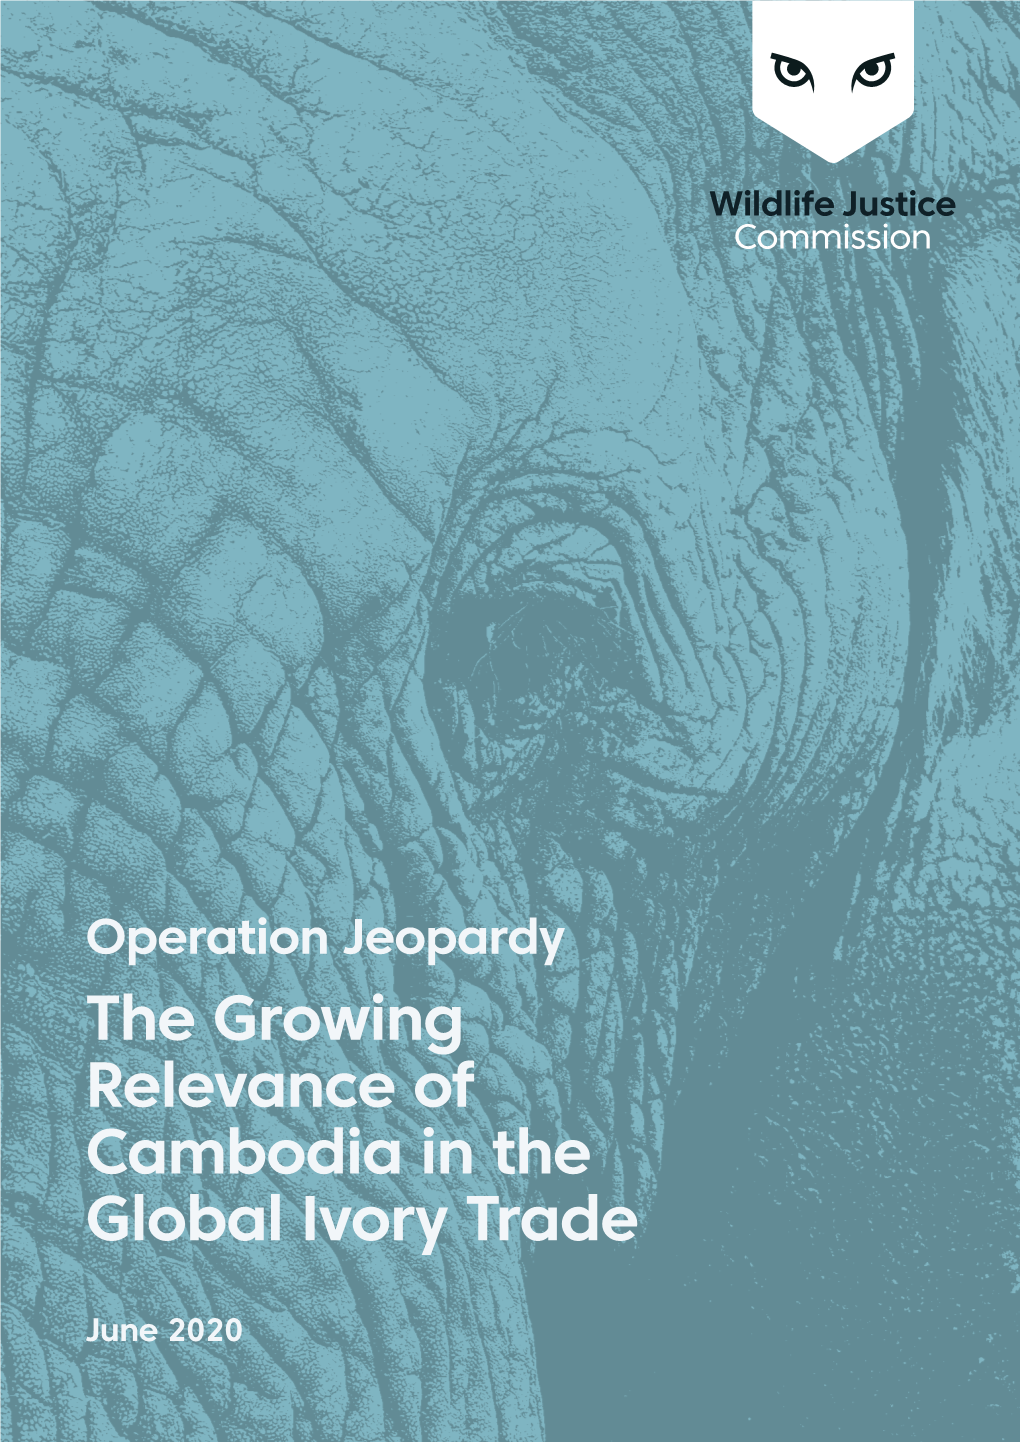 Operation Jeopardy – the Growing Relevance of Cambodia in the Global Ivory Trade